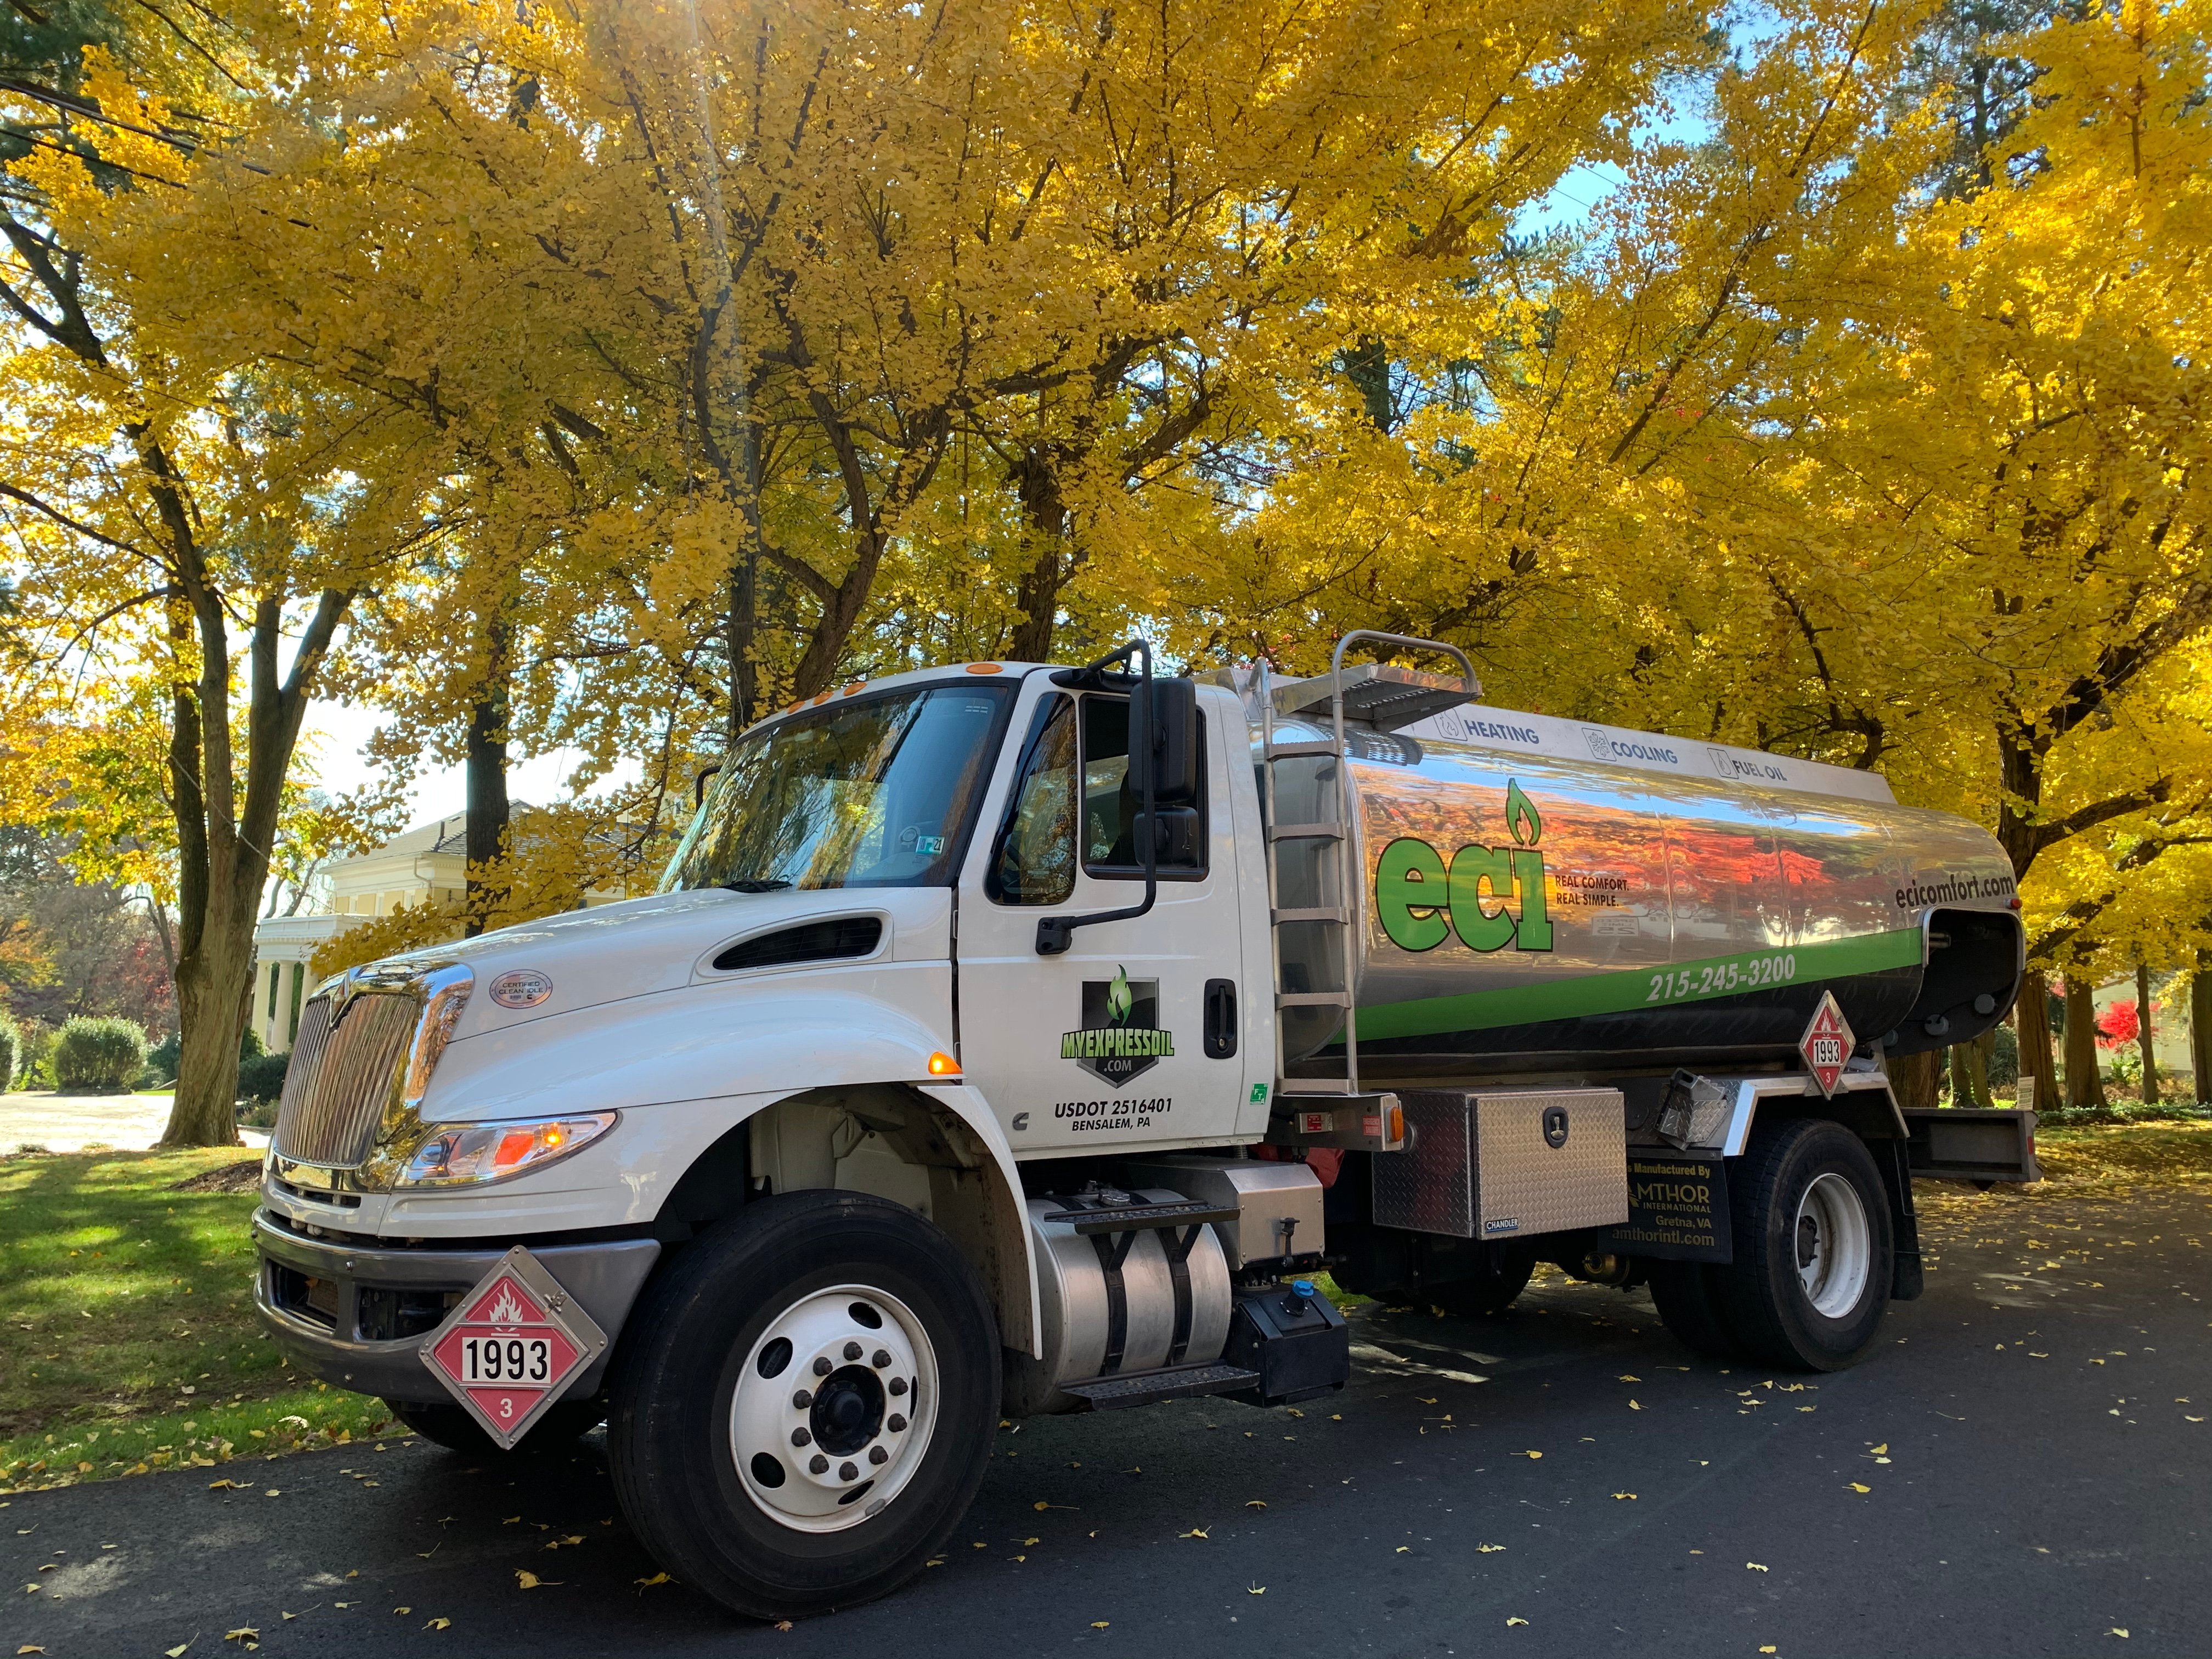 ECI Comfort oil delivery in Bucks County